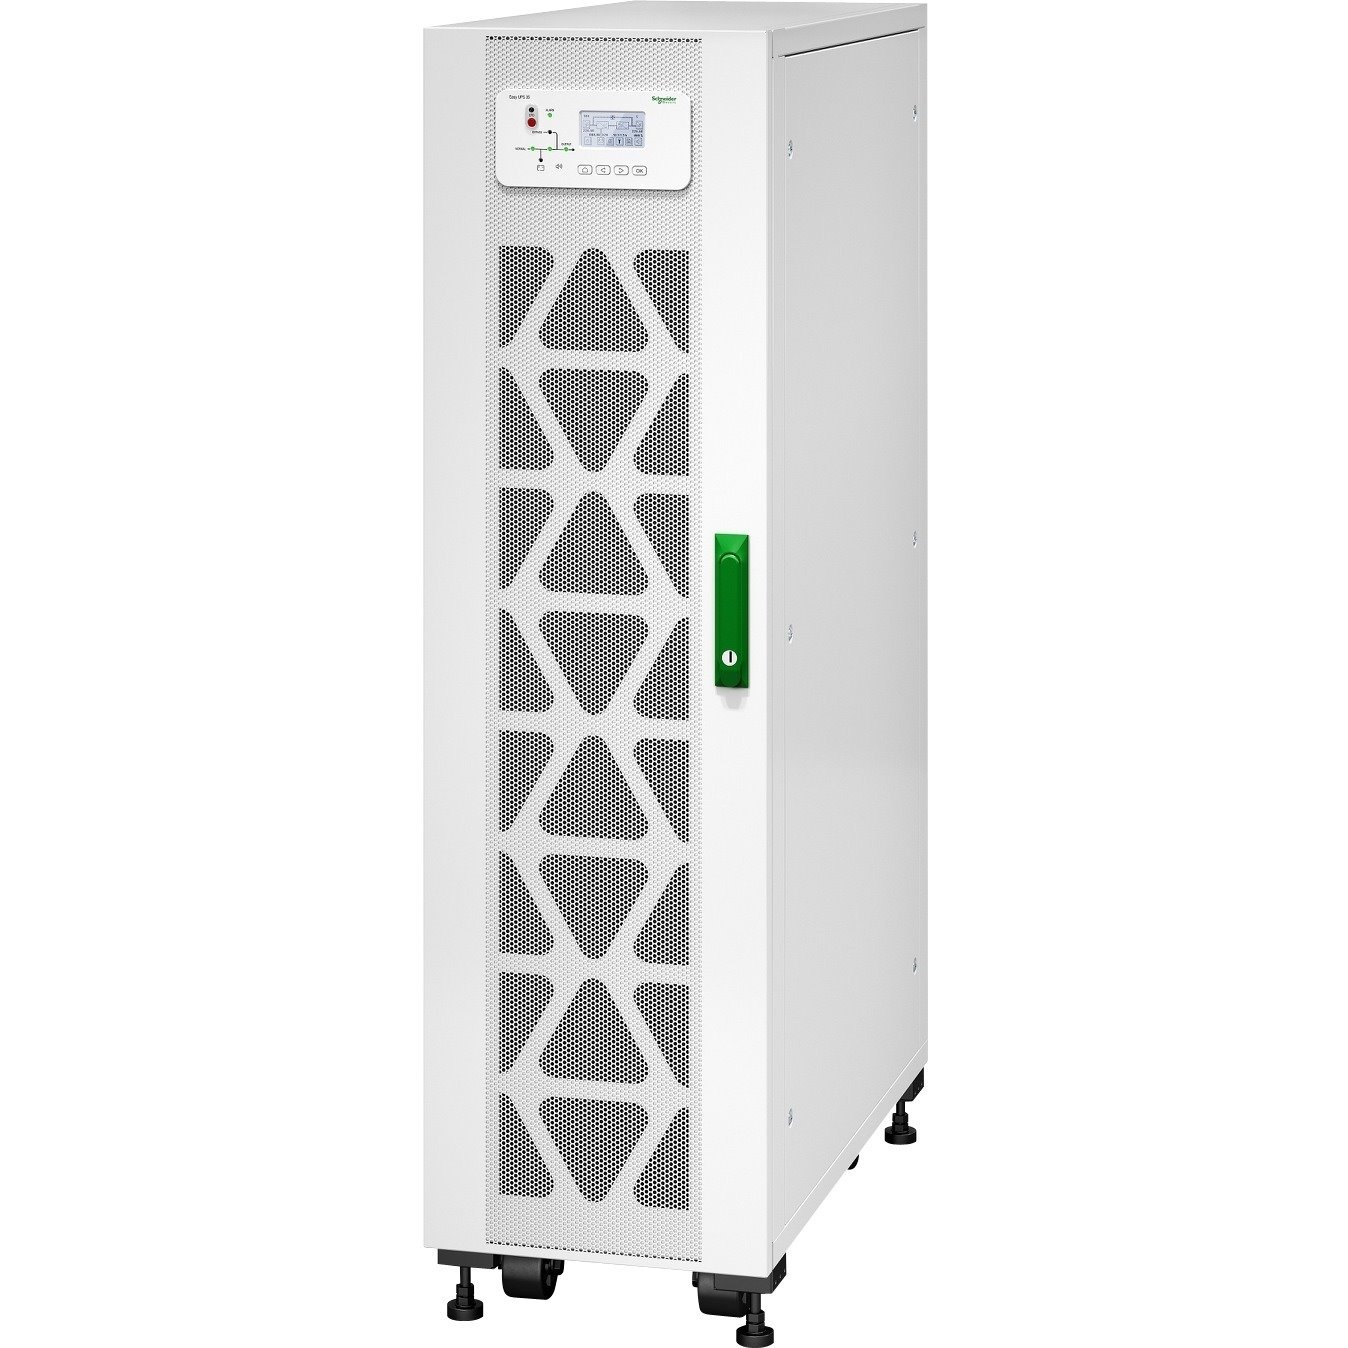 APC by Schneider Electric Easy UPS 3S Double Conversion Online UPS - 15 kVA - Three Phase